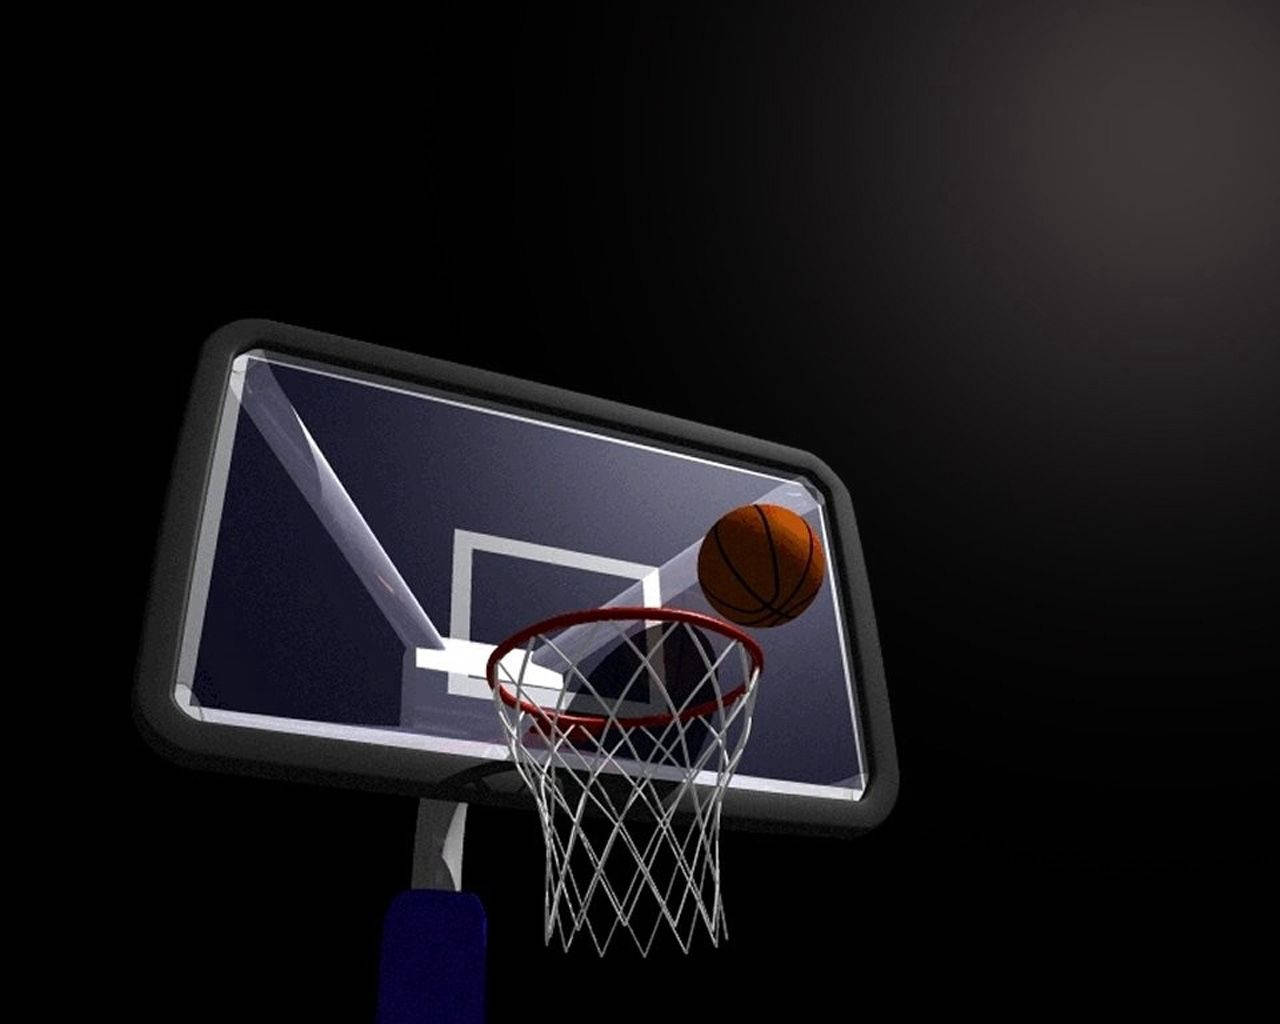 Ball On Basketball Board And Ring Wallpaper